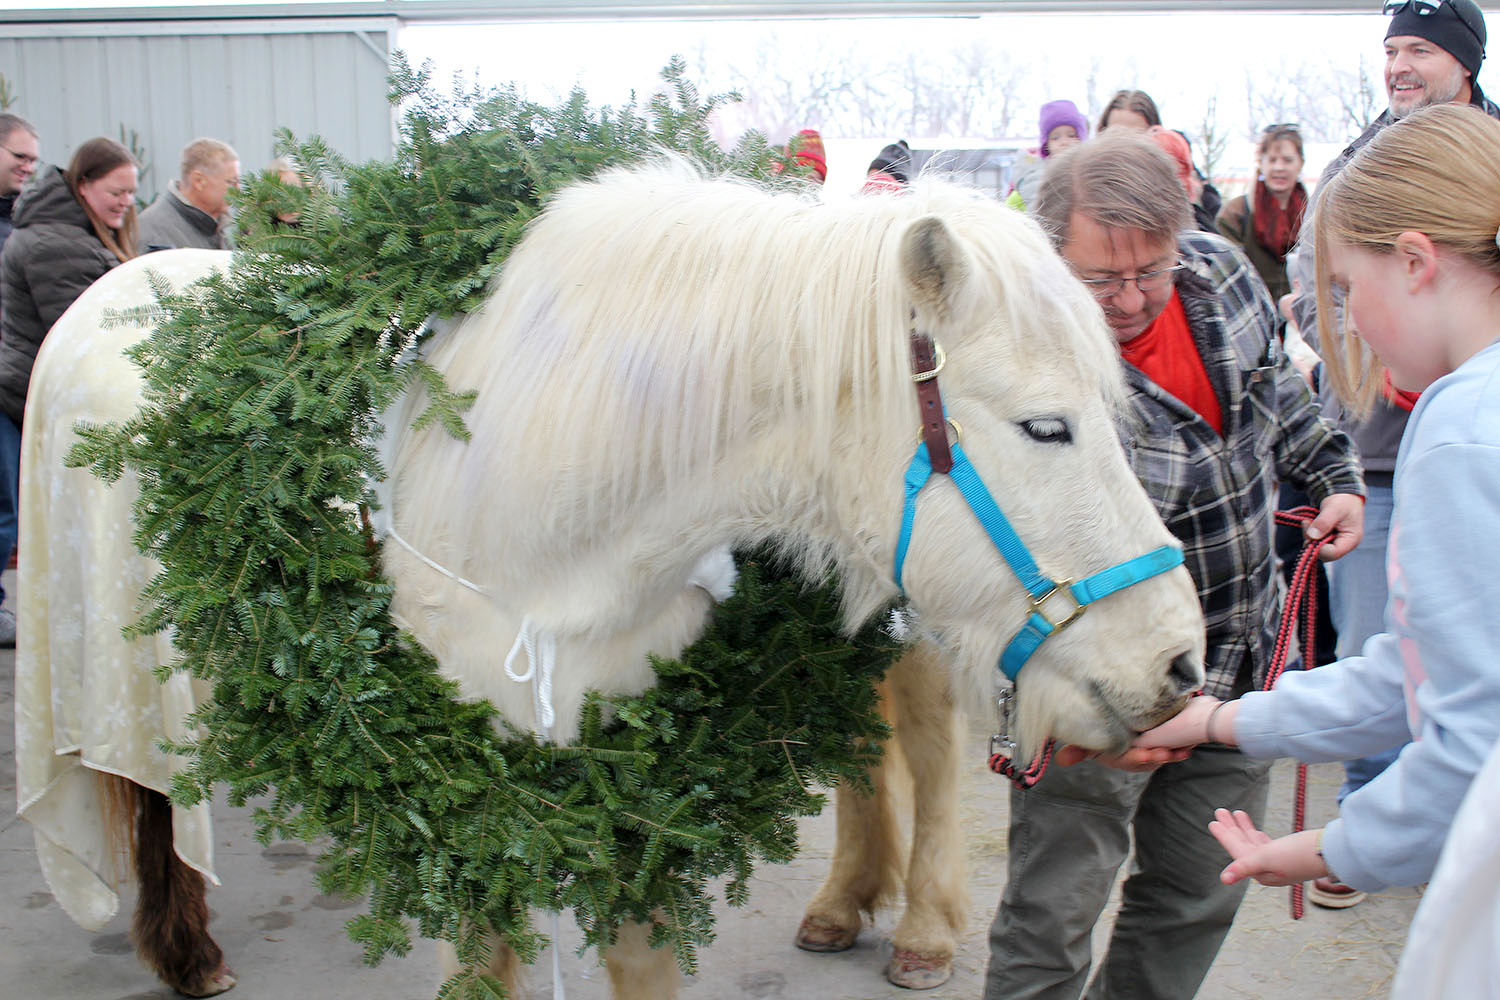 A white Icelandic horse with a wreath on its head is petted by people at Bruce Company, Middleton.